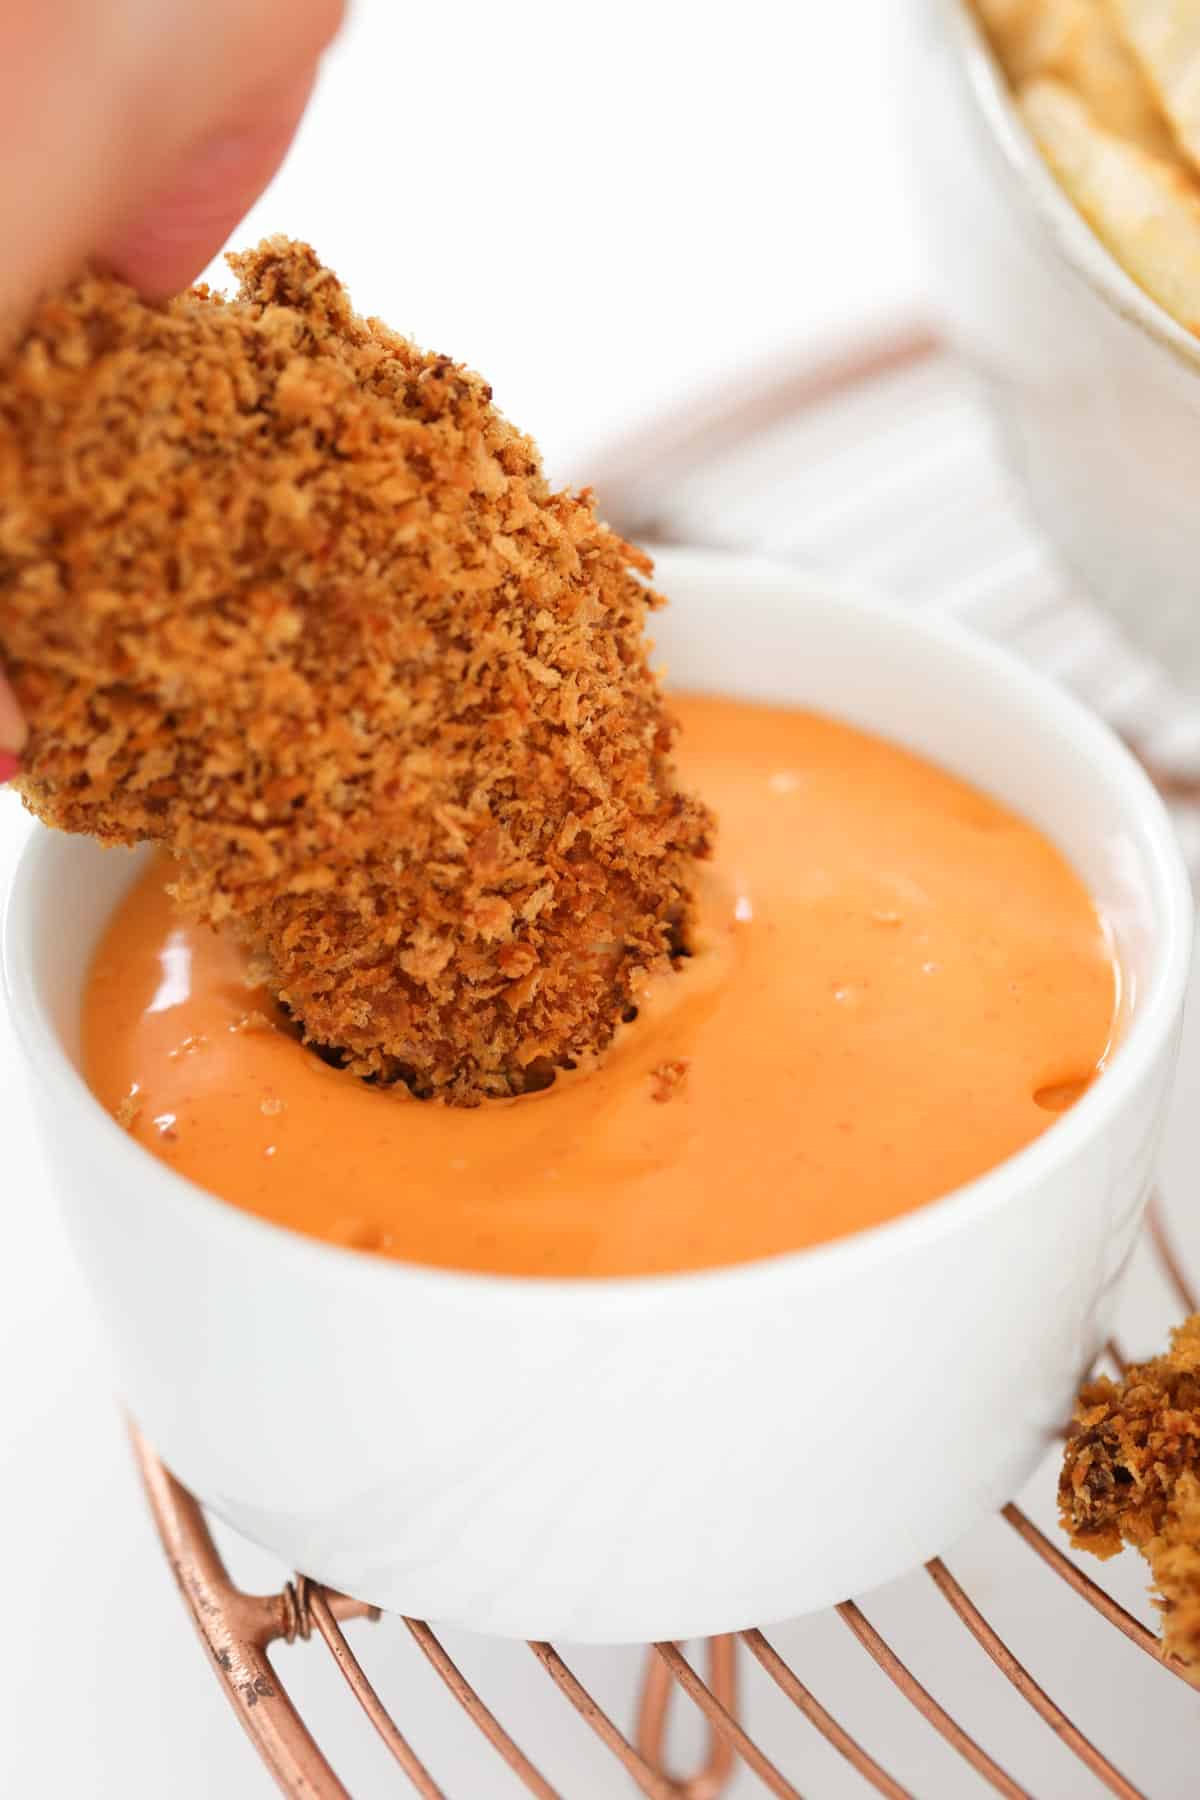 A baked chicken tenderloin being dipped in a bowl of spicy dipping sauce.